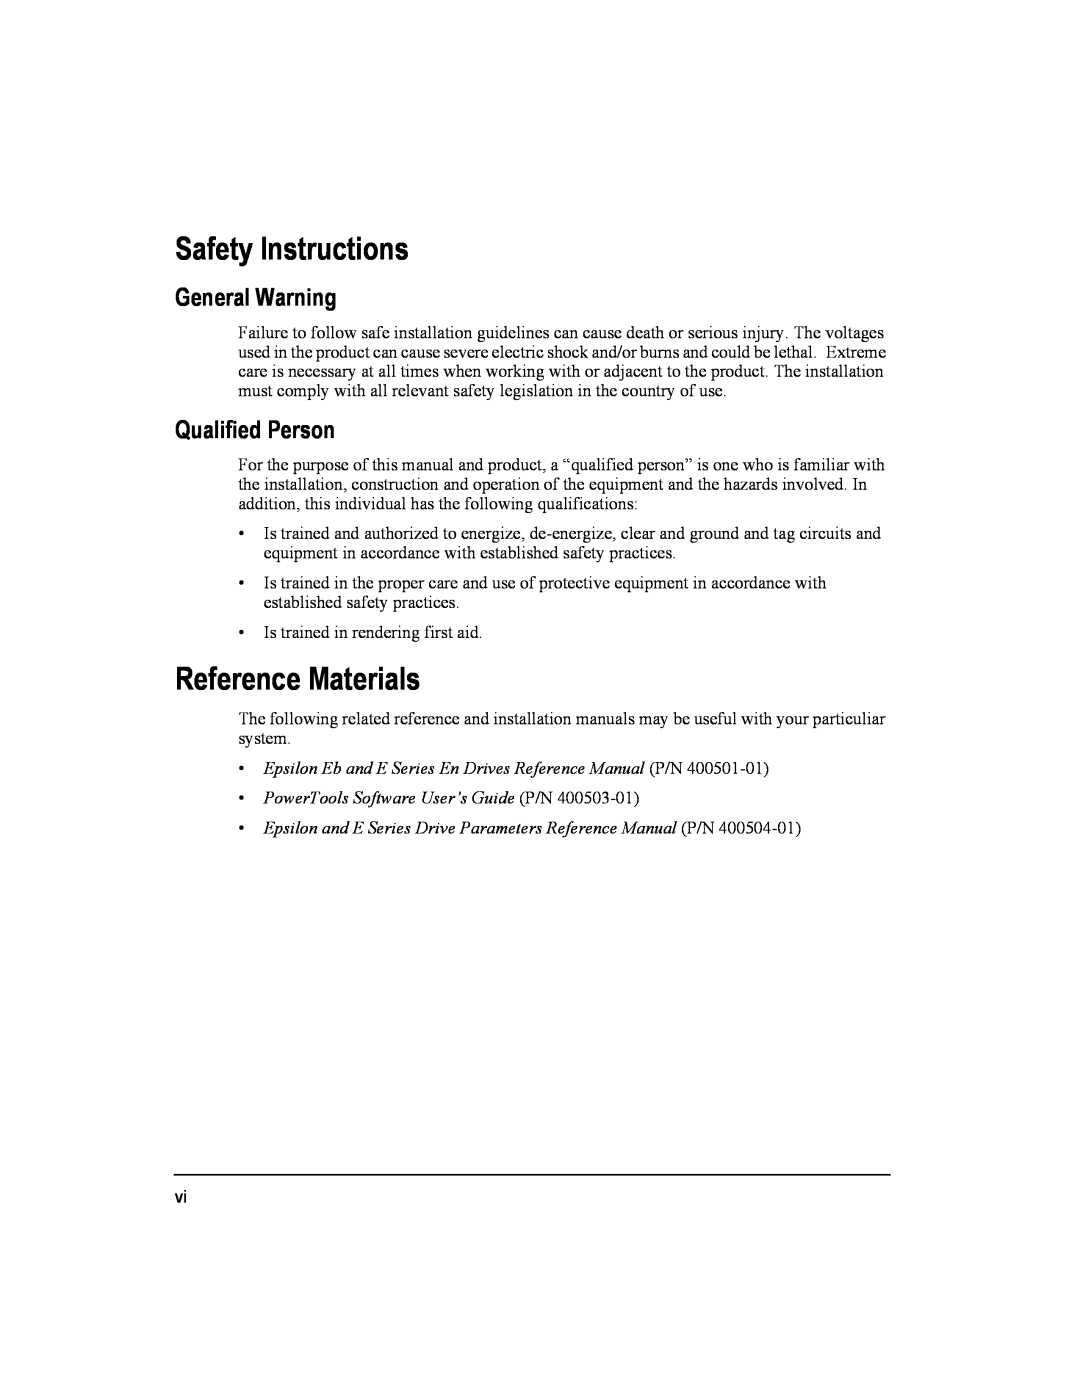 Emerson 400501-05 installation manual Safety Instructions, Reference Materials, General Warning, Qualified Person 